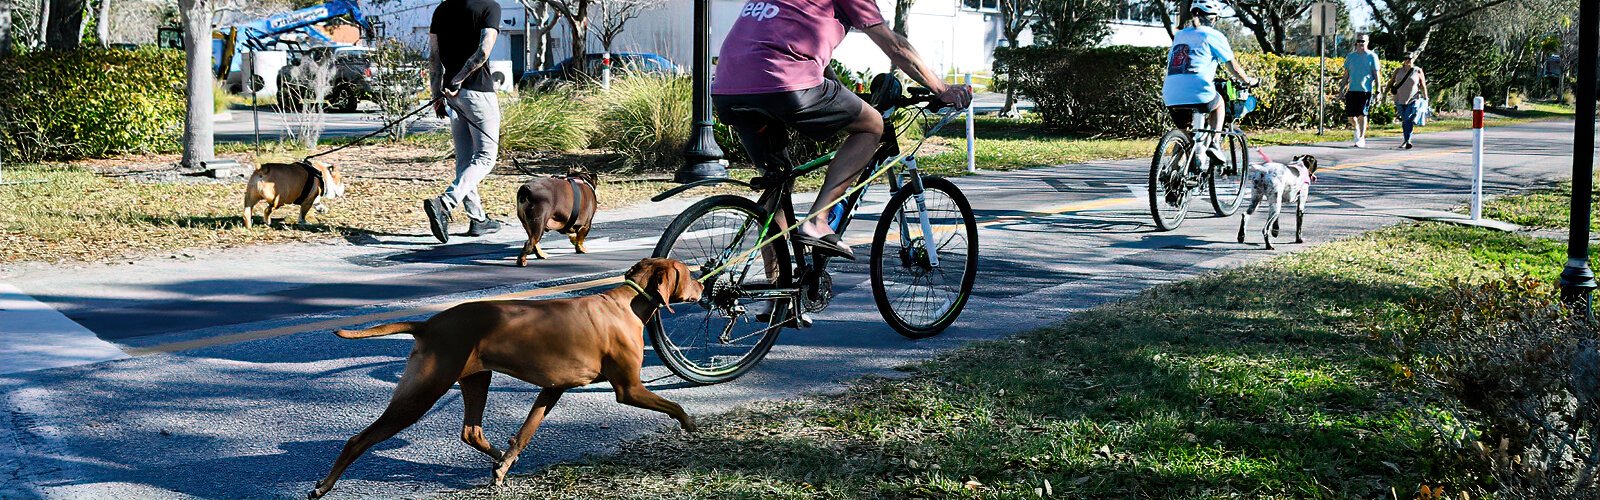 Cycling on the Pinellas Trail through Dunedin, cyclists and their pooches running along besides them get good exercise.